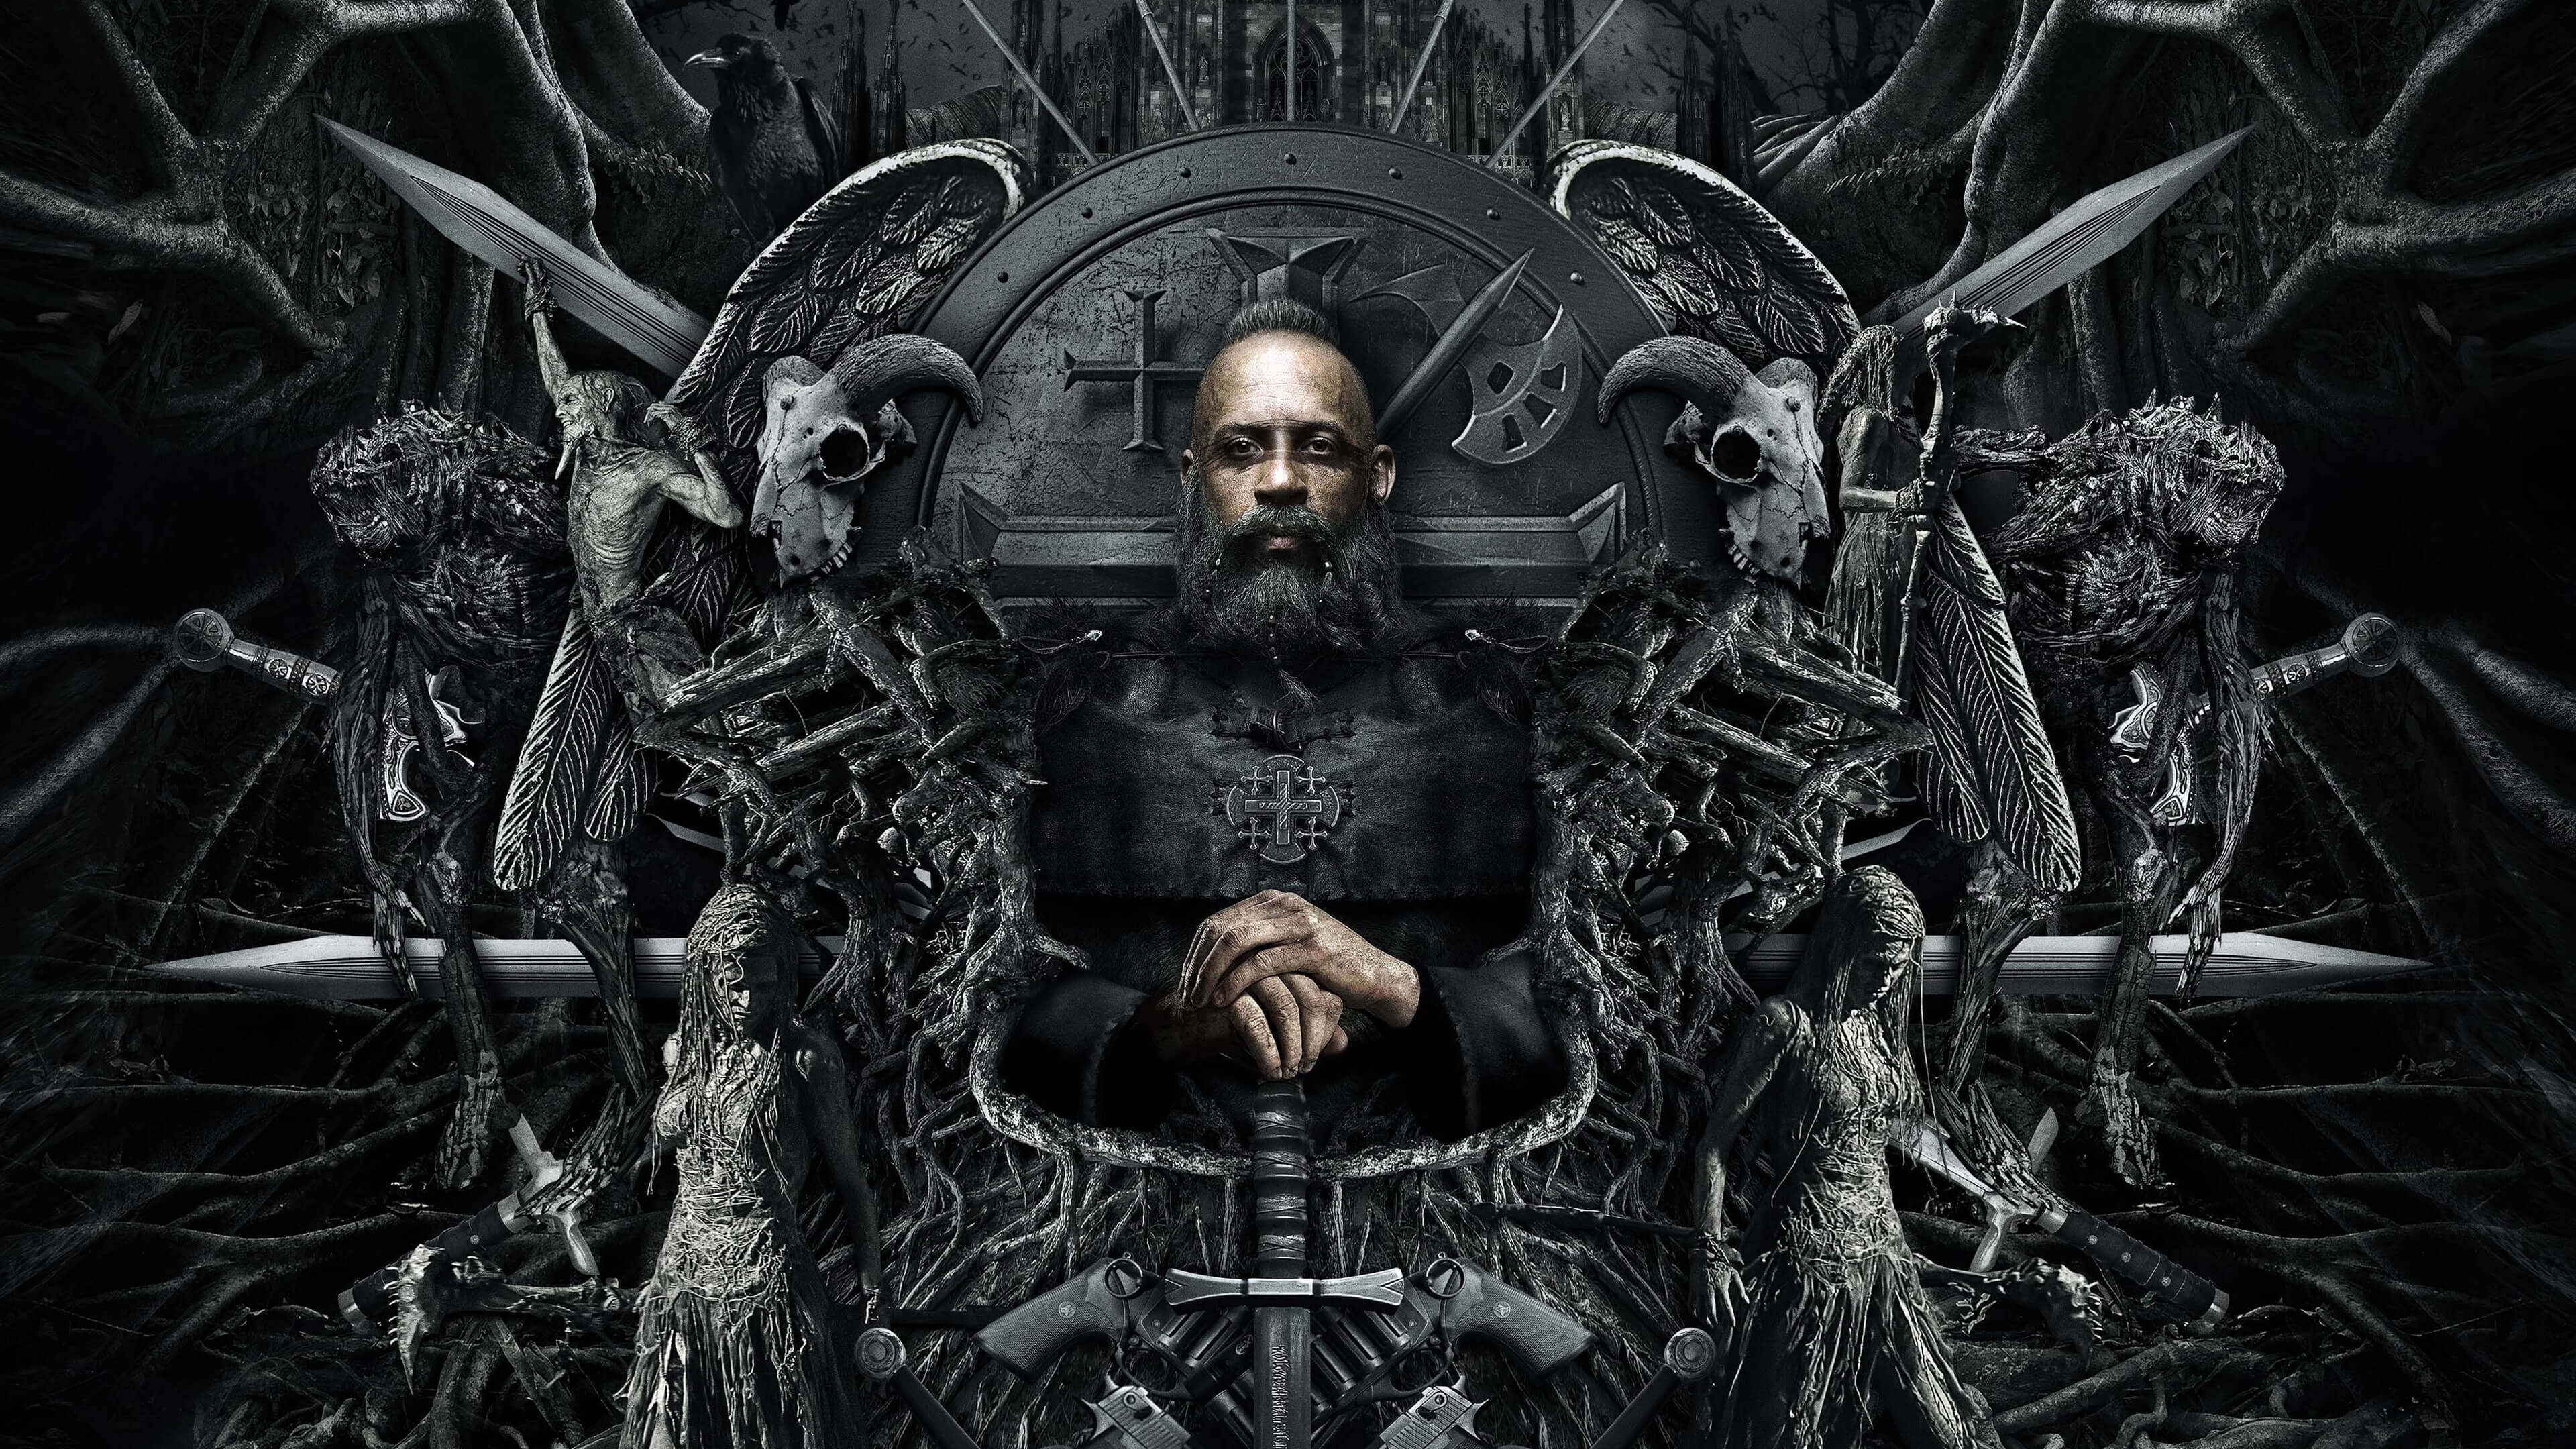 The Last Witch Hunter Throne for 3840 x 2160 Ultra HD resolution